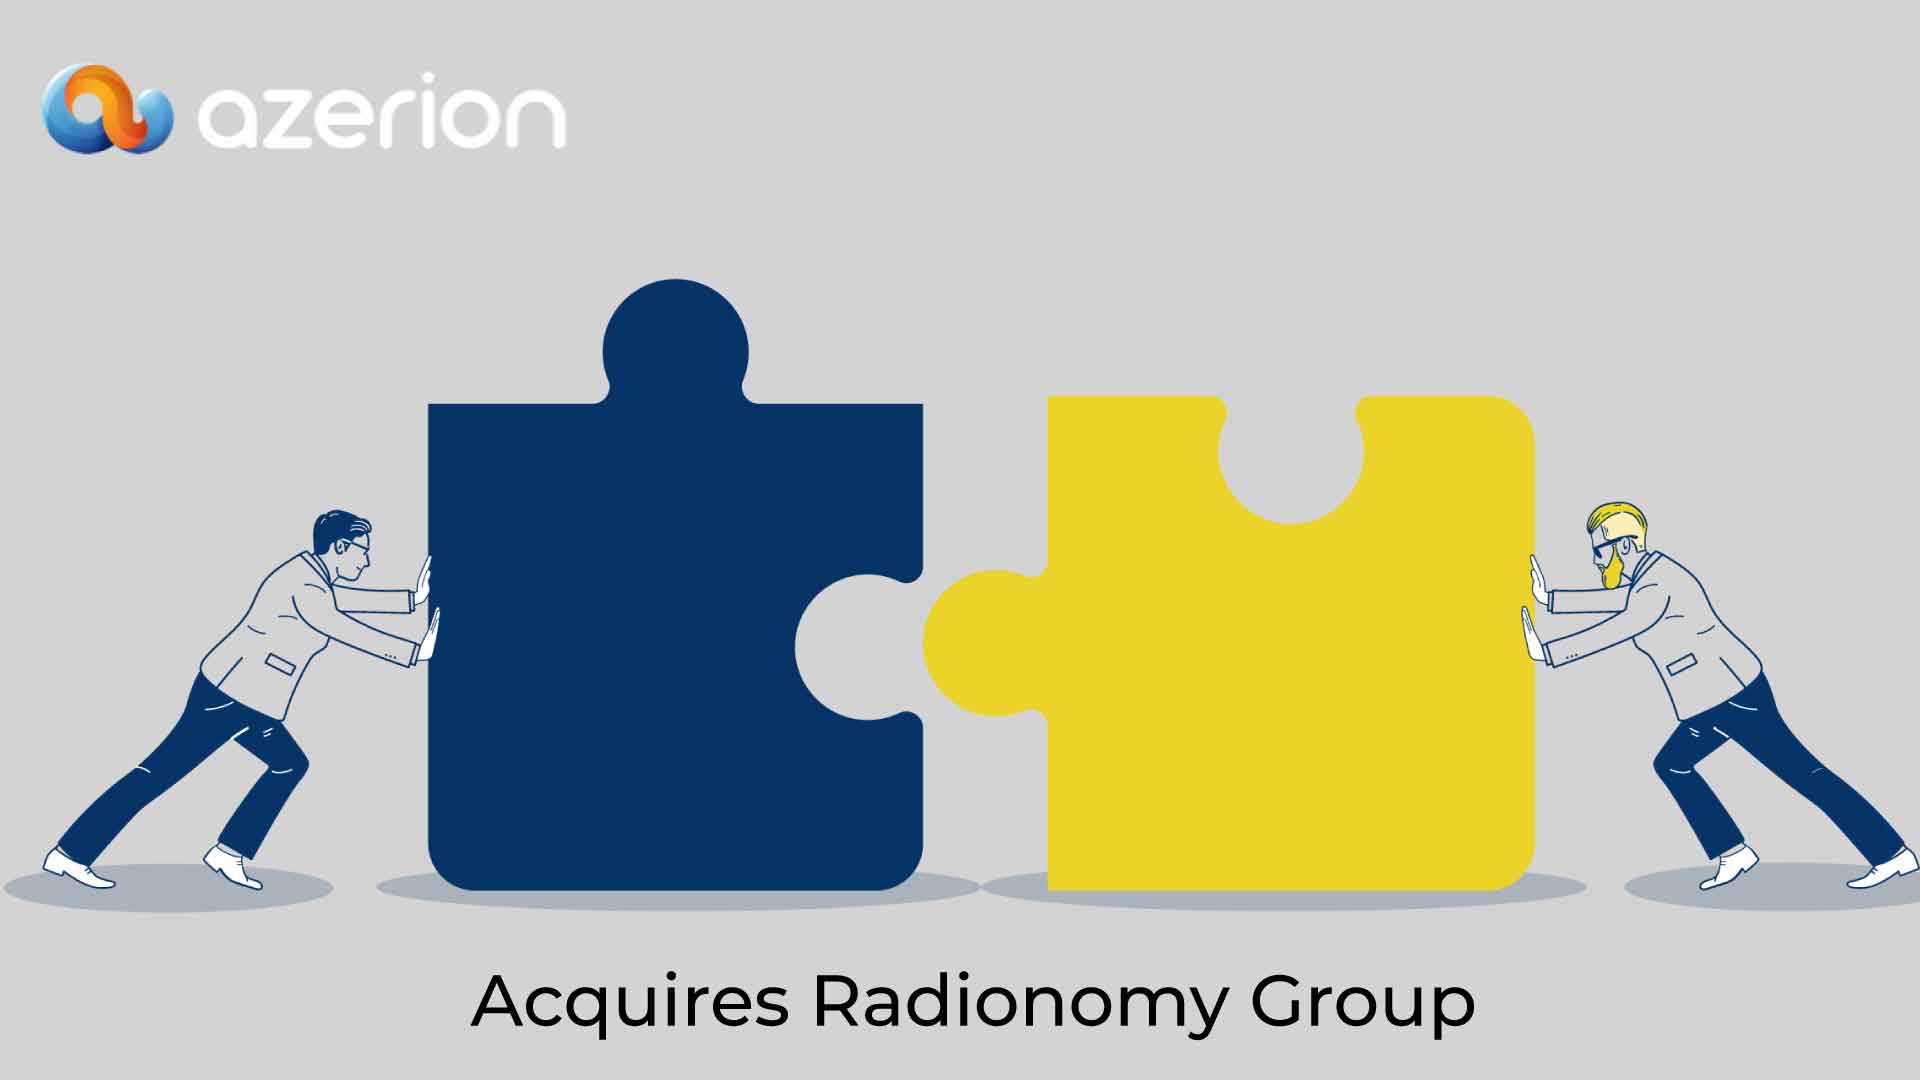 Azerion acquires Radionomy and enters audio advertising market